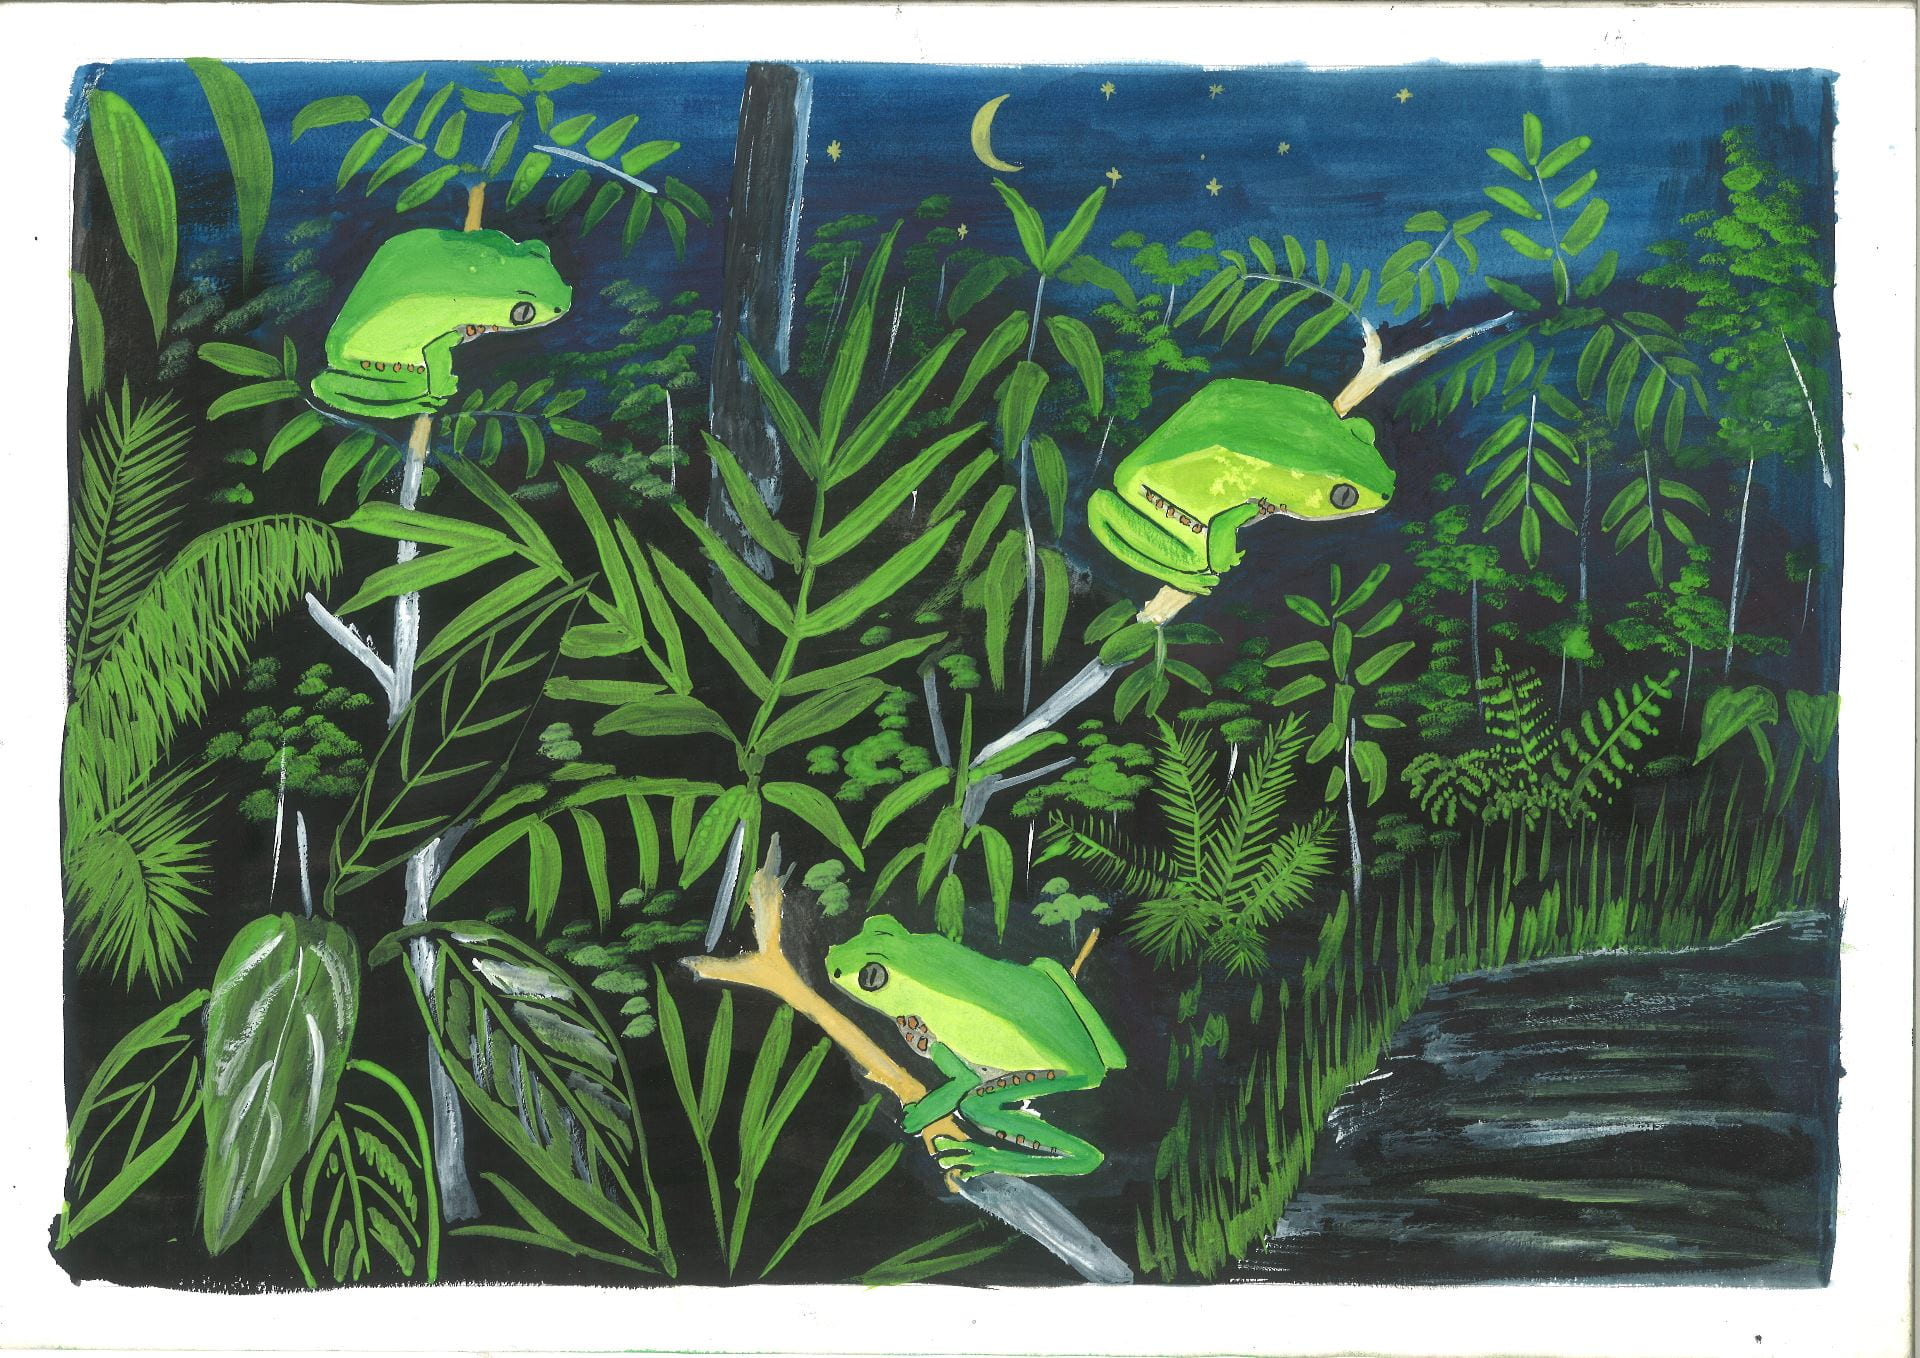 An illustration of three frogs clinging onto branches in the rainforest at night